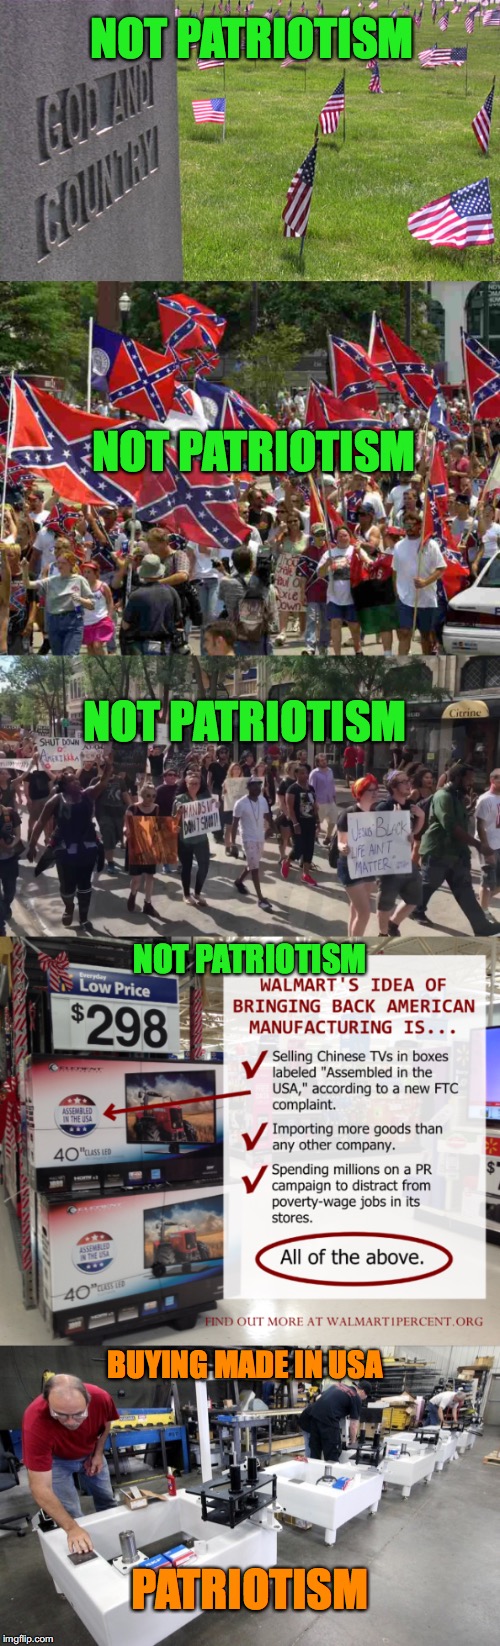 Patriotism Starts With Your Wallet | NOT PATRIOTISM; NOT PATRIOTISM; NOT PATRIOTISM; NOT PATRIOTISM; BUYING MADE IN USA; PATRIOTISM | image tagged in patriot,patriotism,made in usa,patriotic,walmart | made w/ Imgflip meme maker